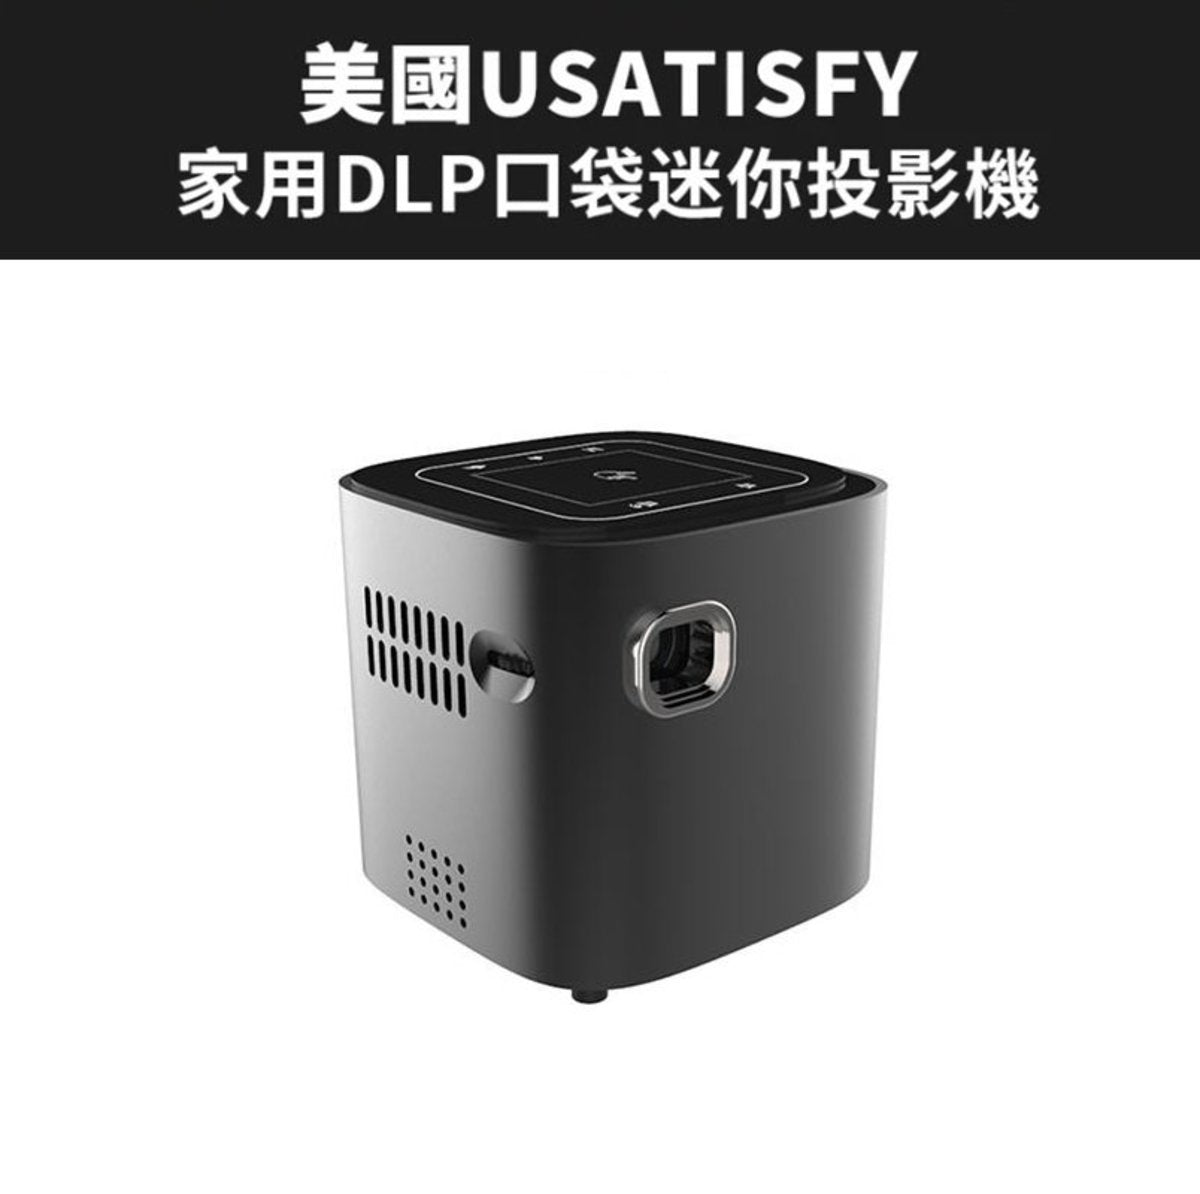 Usatisfy - USA USATISFY Home DLP Pocket Mini Projector #Additional 60-inch hanging projection screen [Hong Kong licensed product]